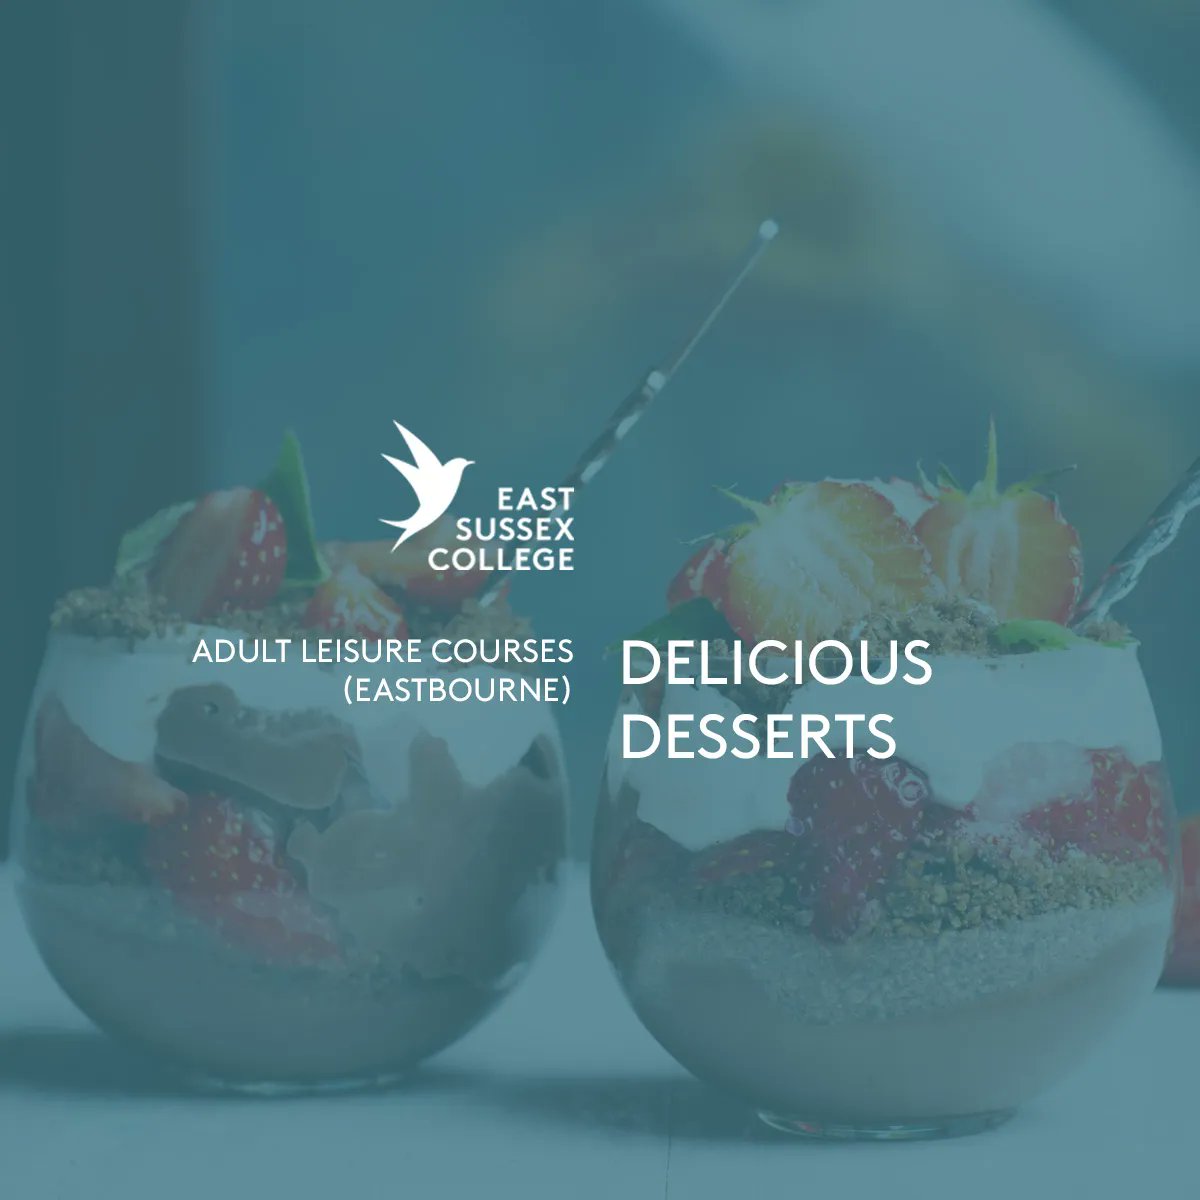 Learn more about creating and presenting delicious deserts including scrummy puddings and melt in the mouth pastries with our evening course starting this Thursday.
#adultleisure #eveningcourse  
Book your place today!!
💻  adult.escg.ac.uk/courses/cateri…